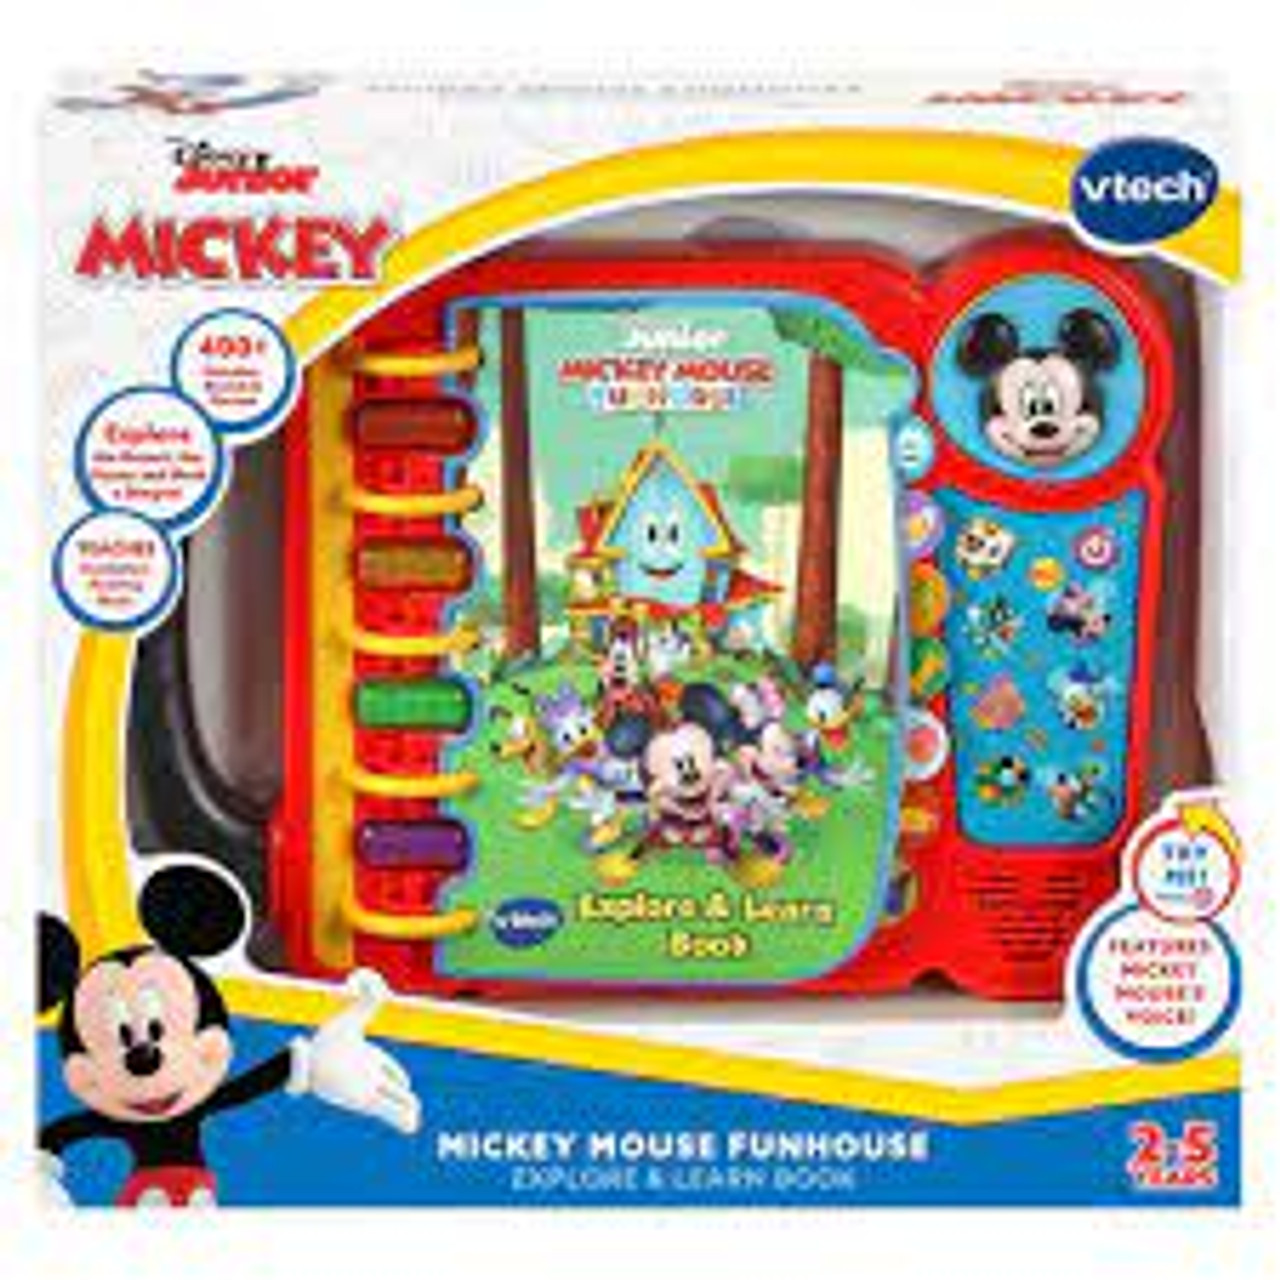 MICKEY MOUSE FUNHOUSE EXPLORE & LEARN BOOK